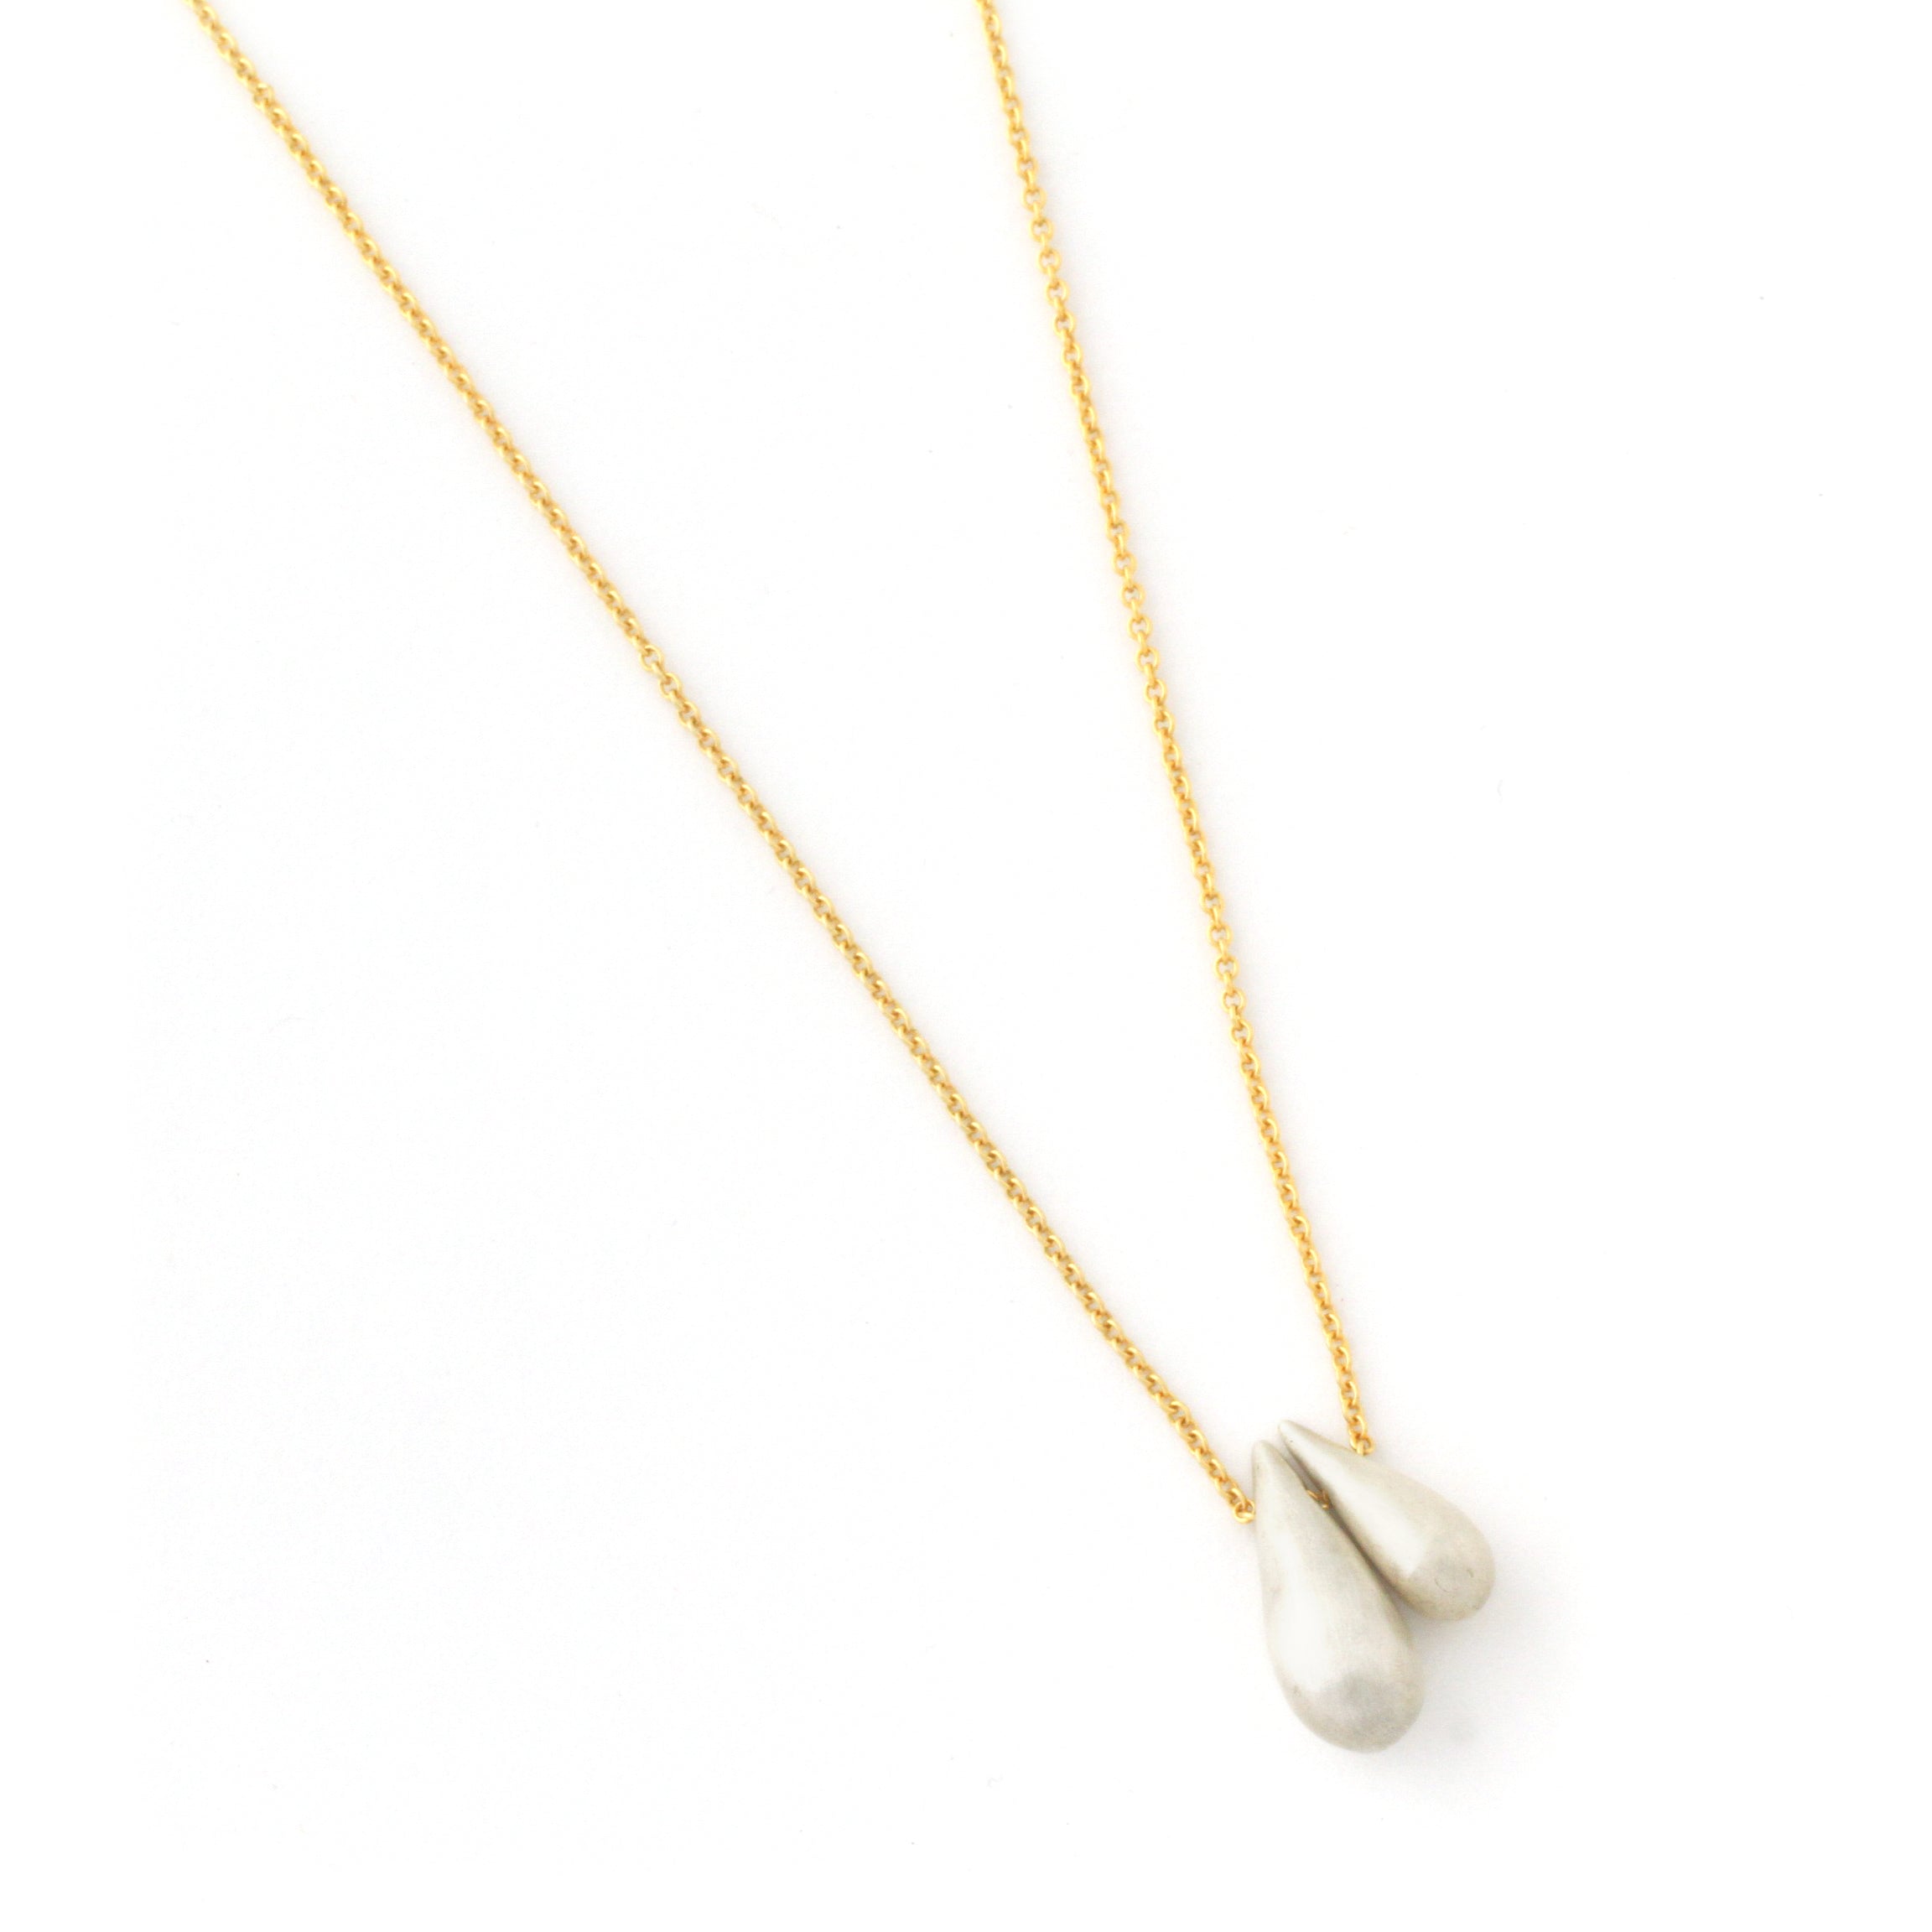 Raindrop Necklace (Double Sterling Silver)